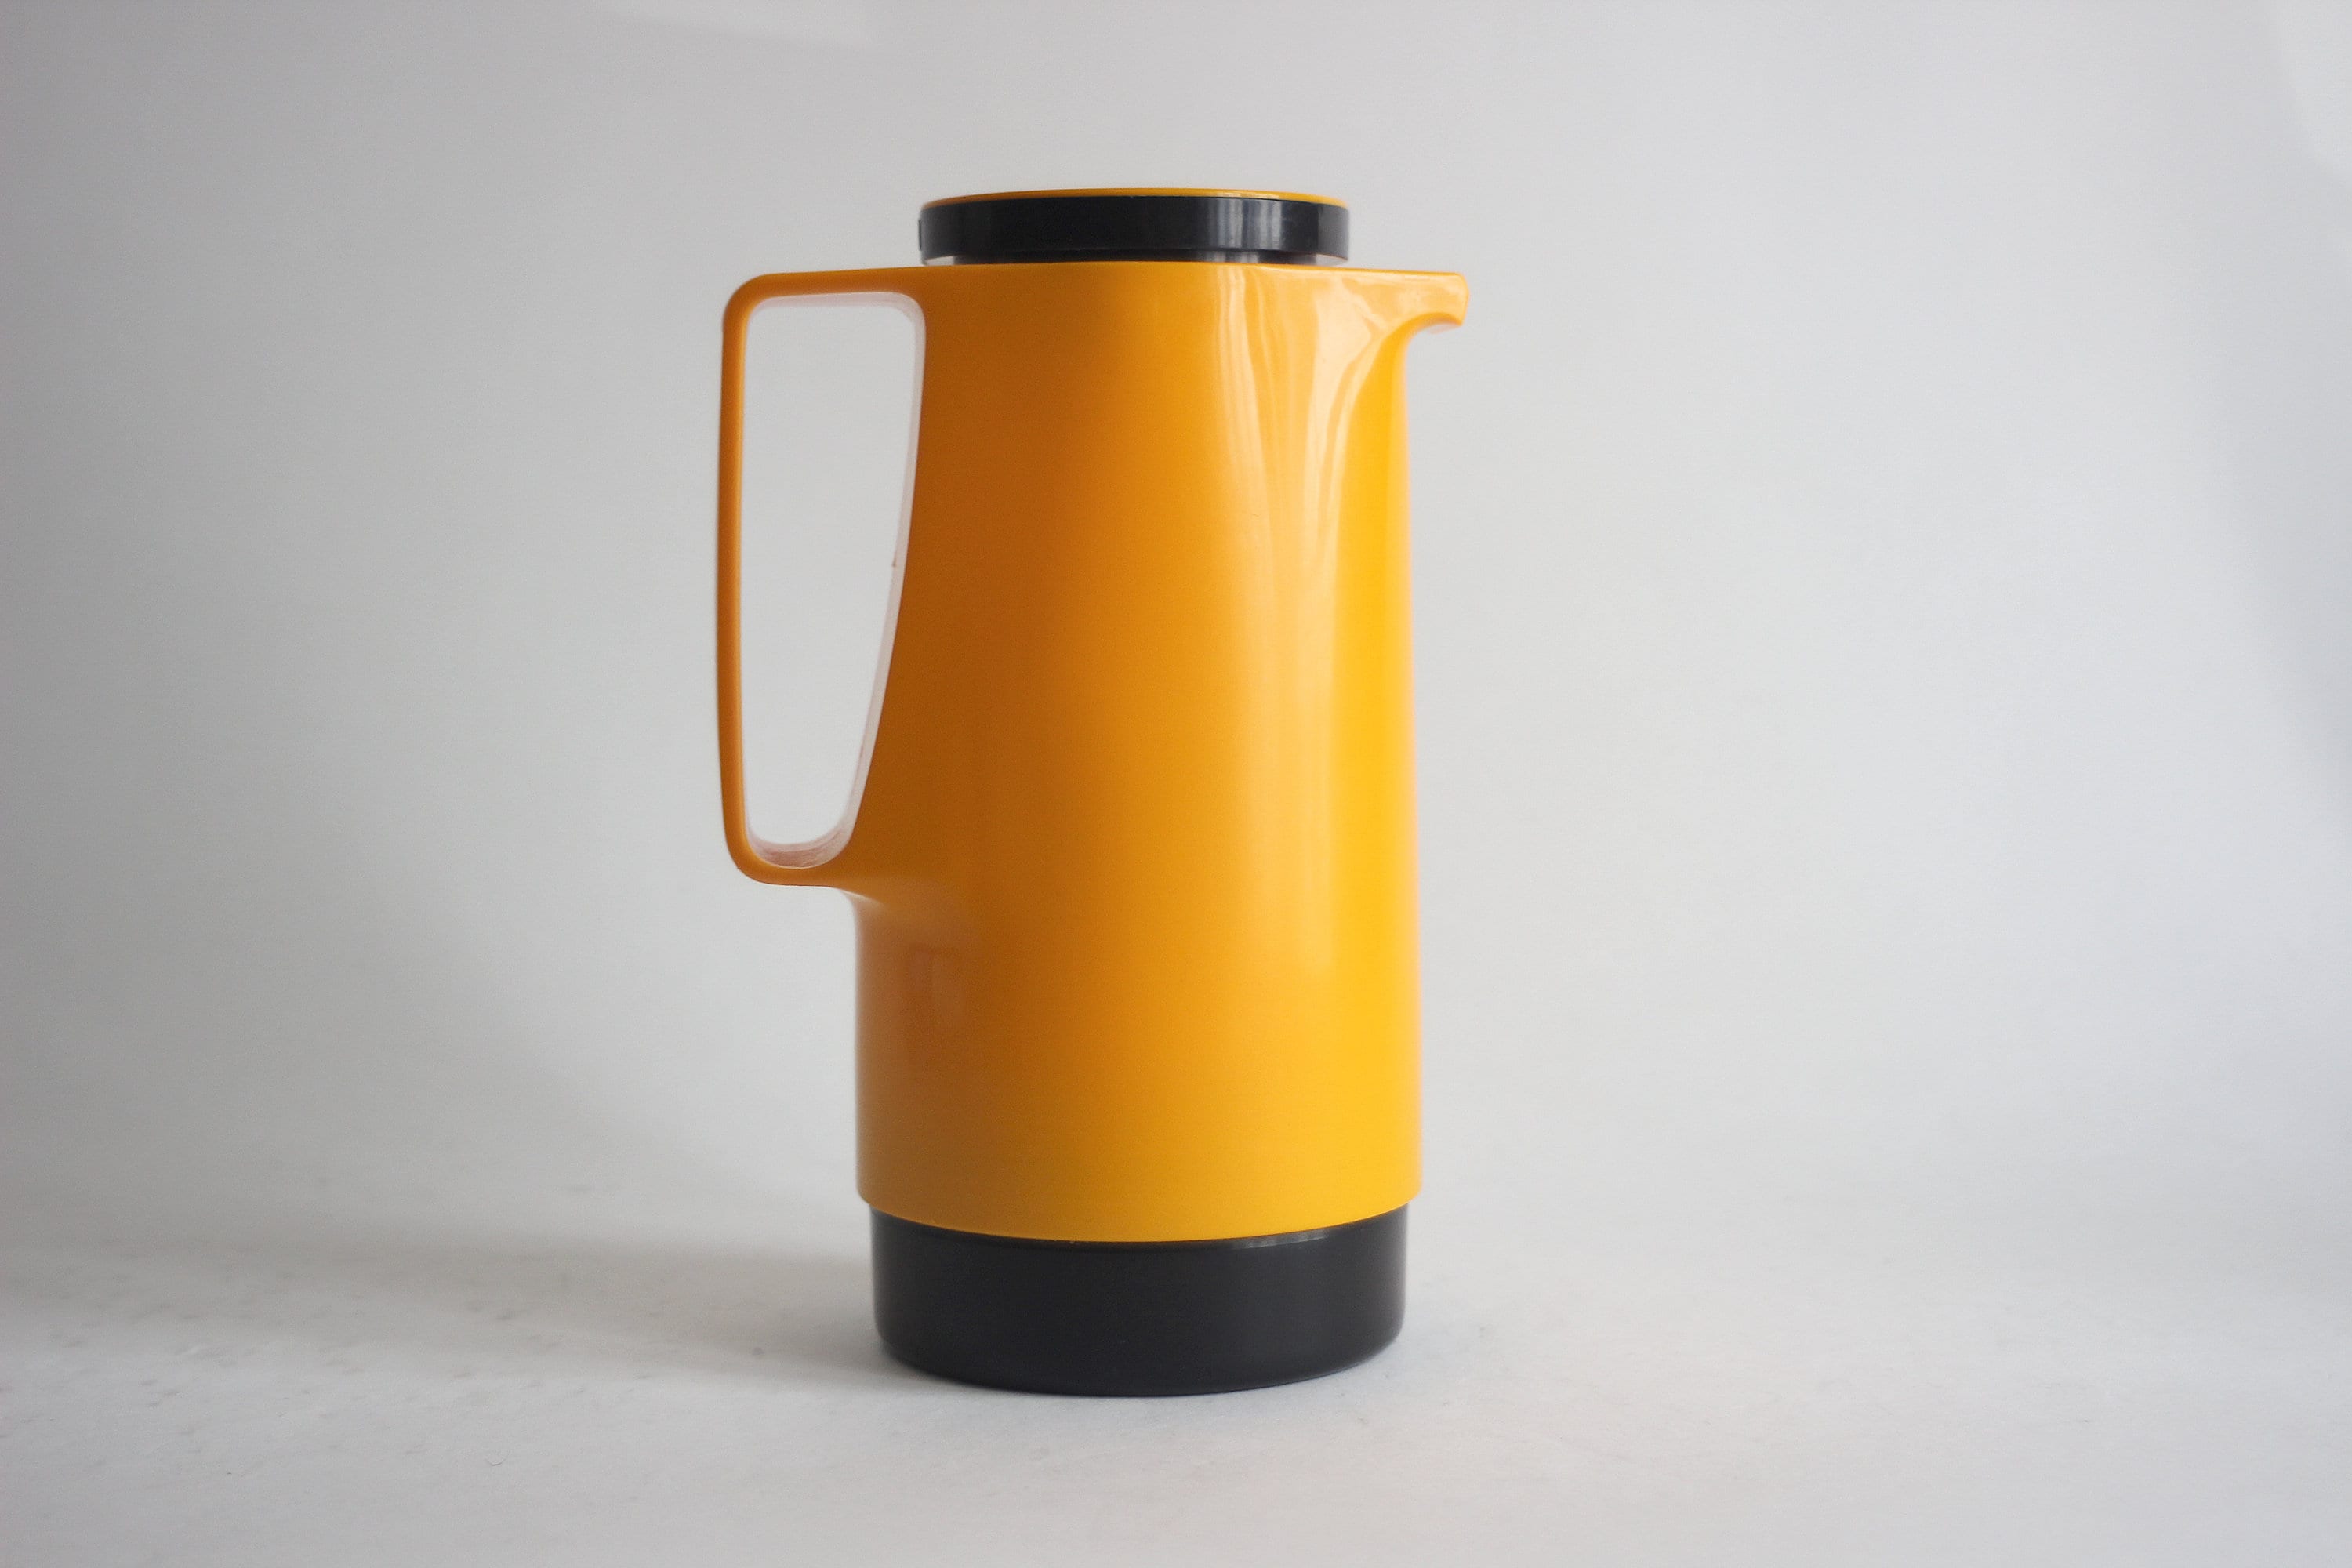 Vintage Thermos “Helga” West Germany #540 Coffee Butler. for Sale